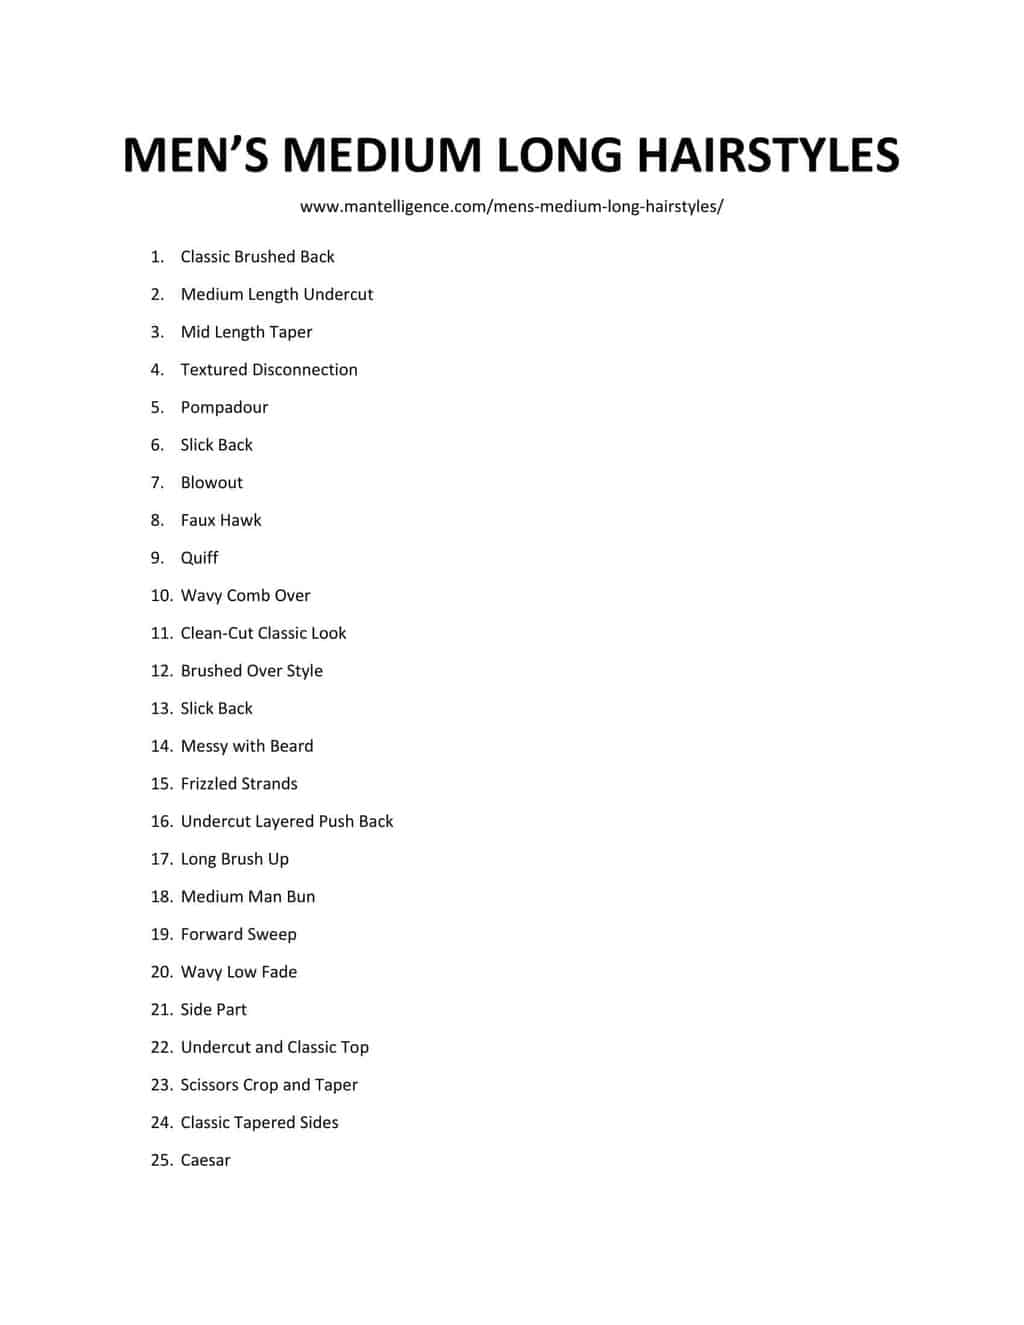 Downloadable and Printable List of Men's Medium Long Hairstyles